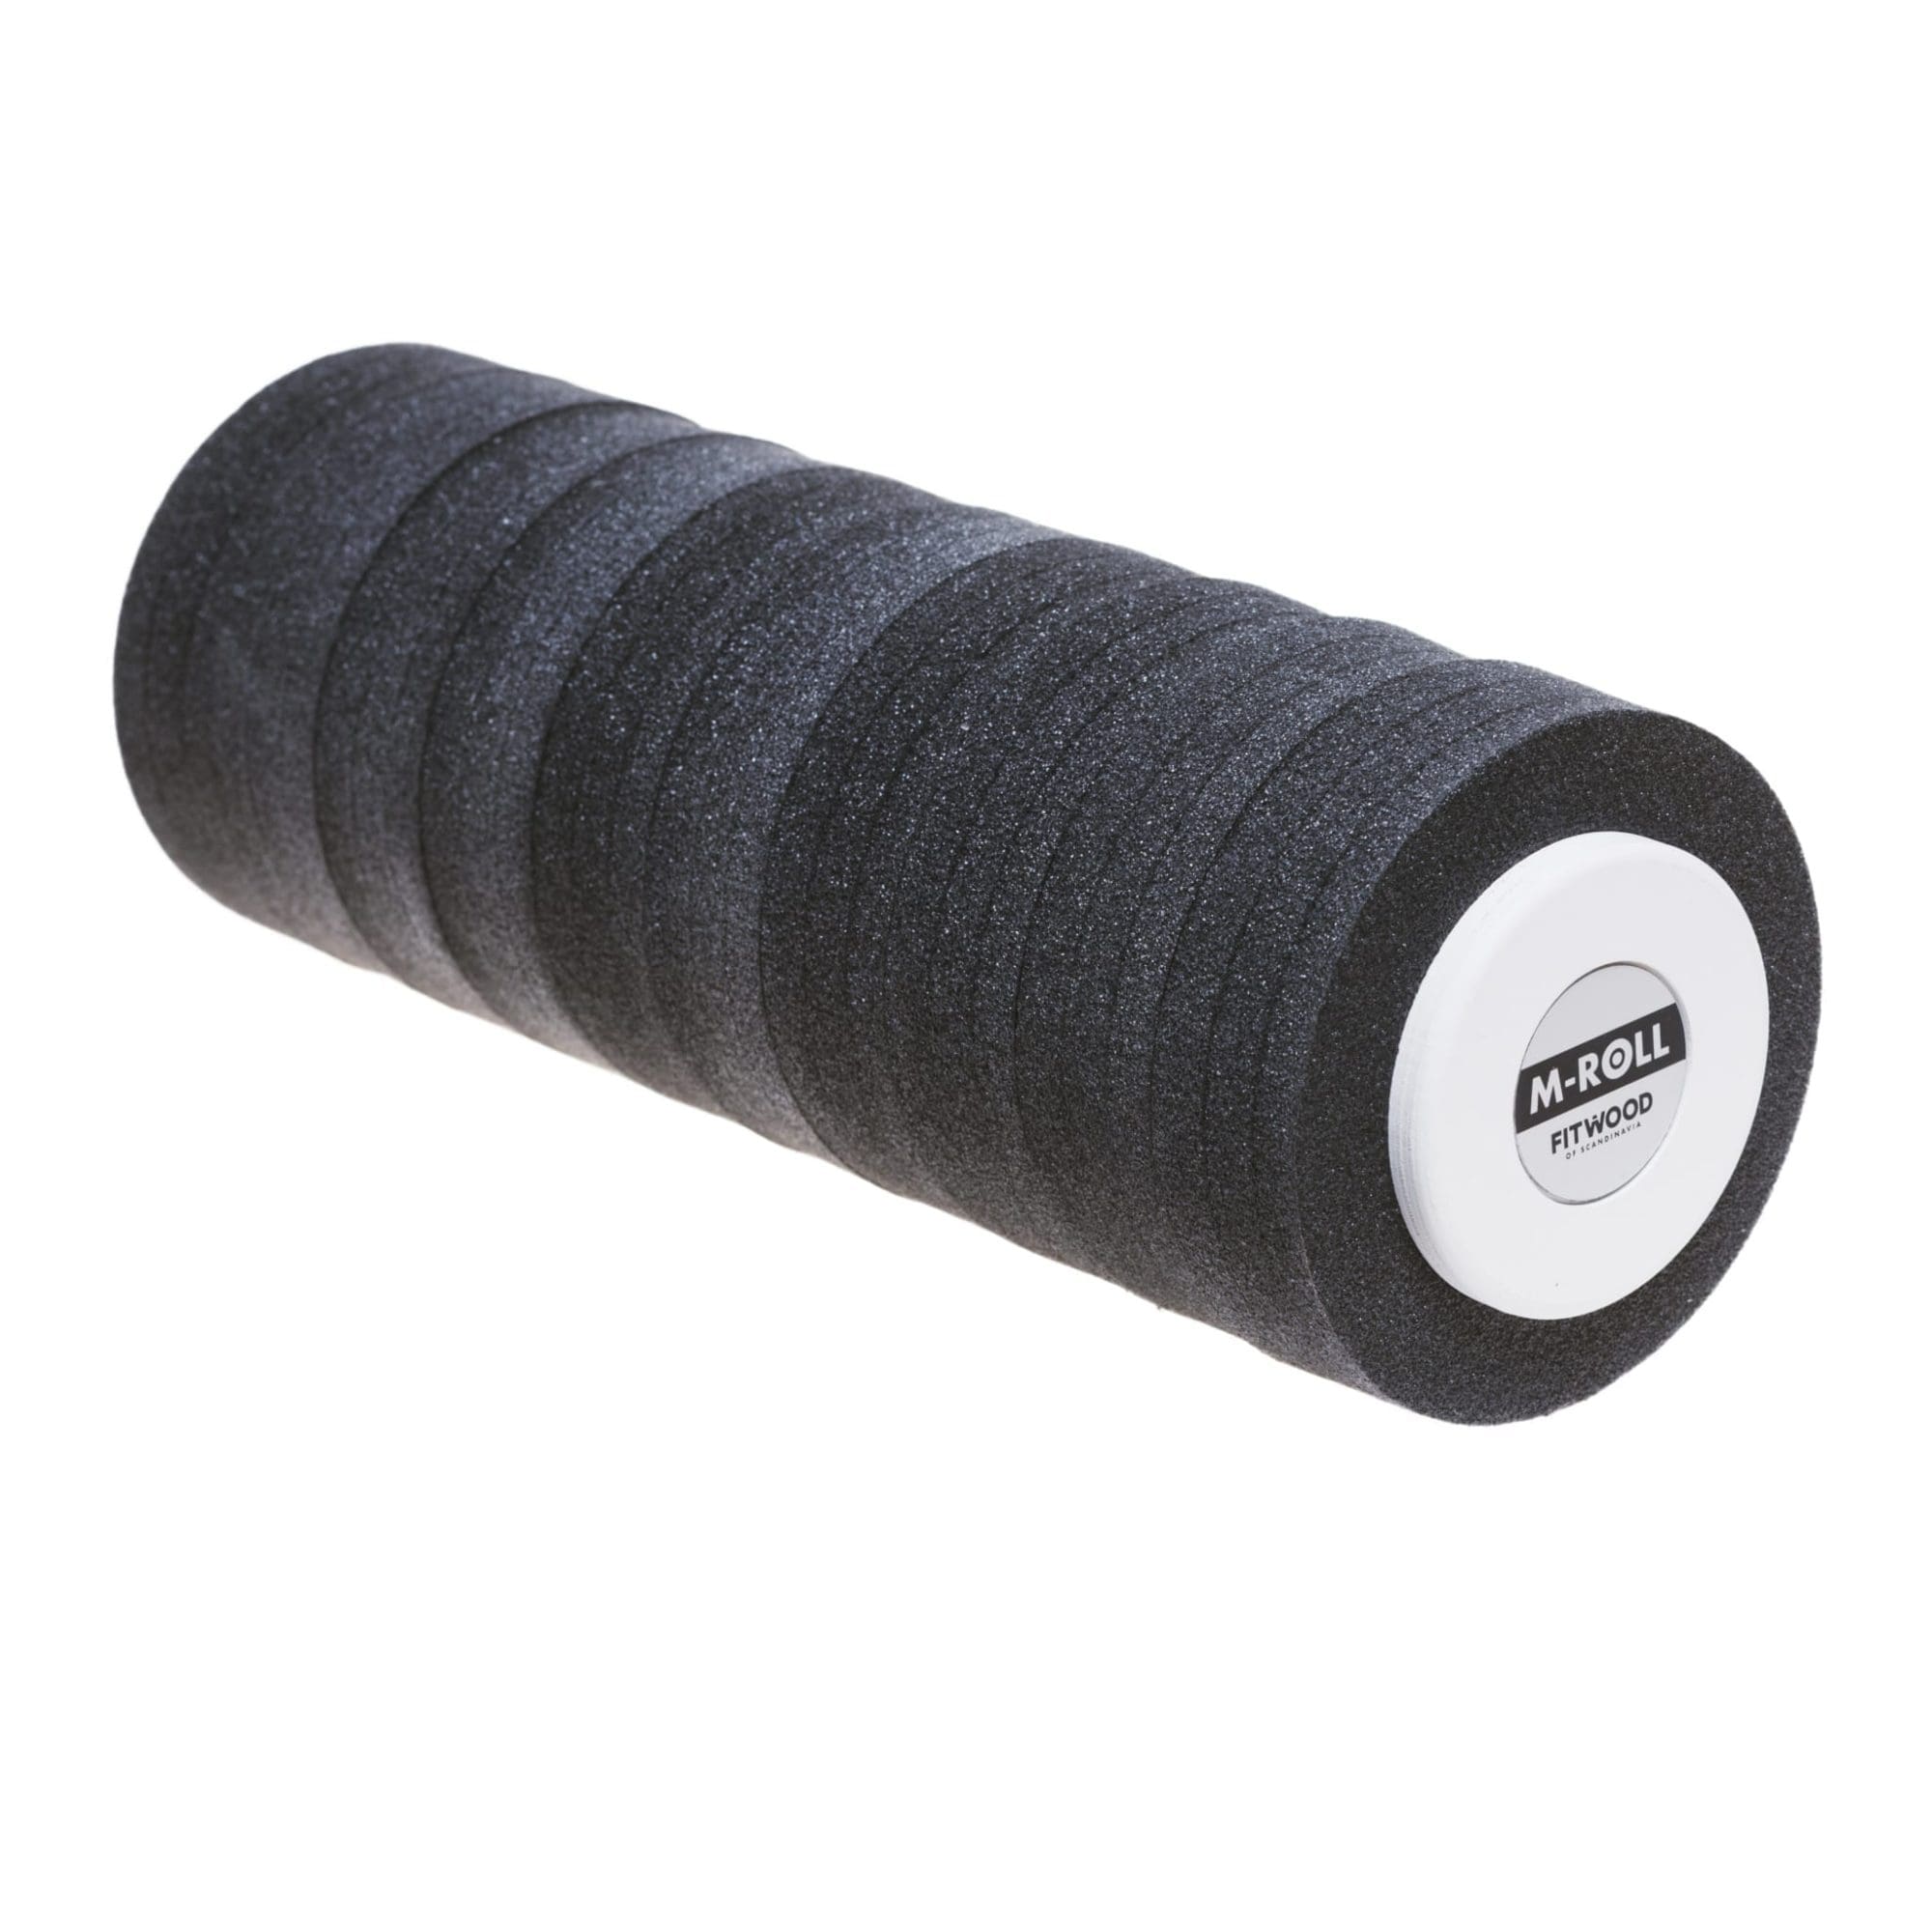 FitWood_M-ROLL_35_massage_roller-_white_wood_graphite_grey_covering_product_image.jpg